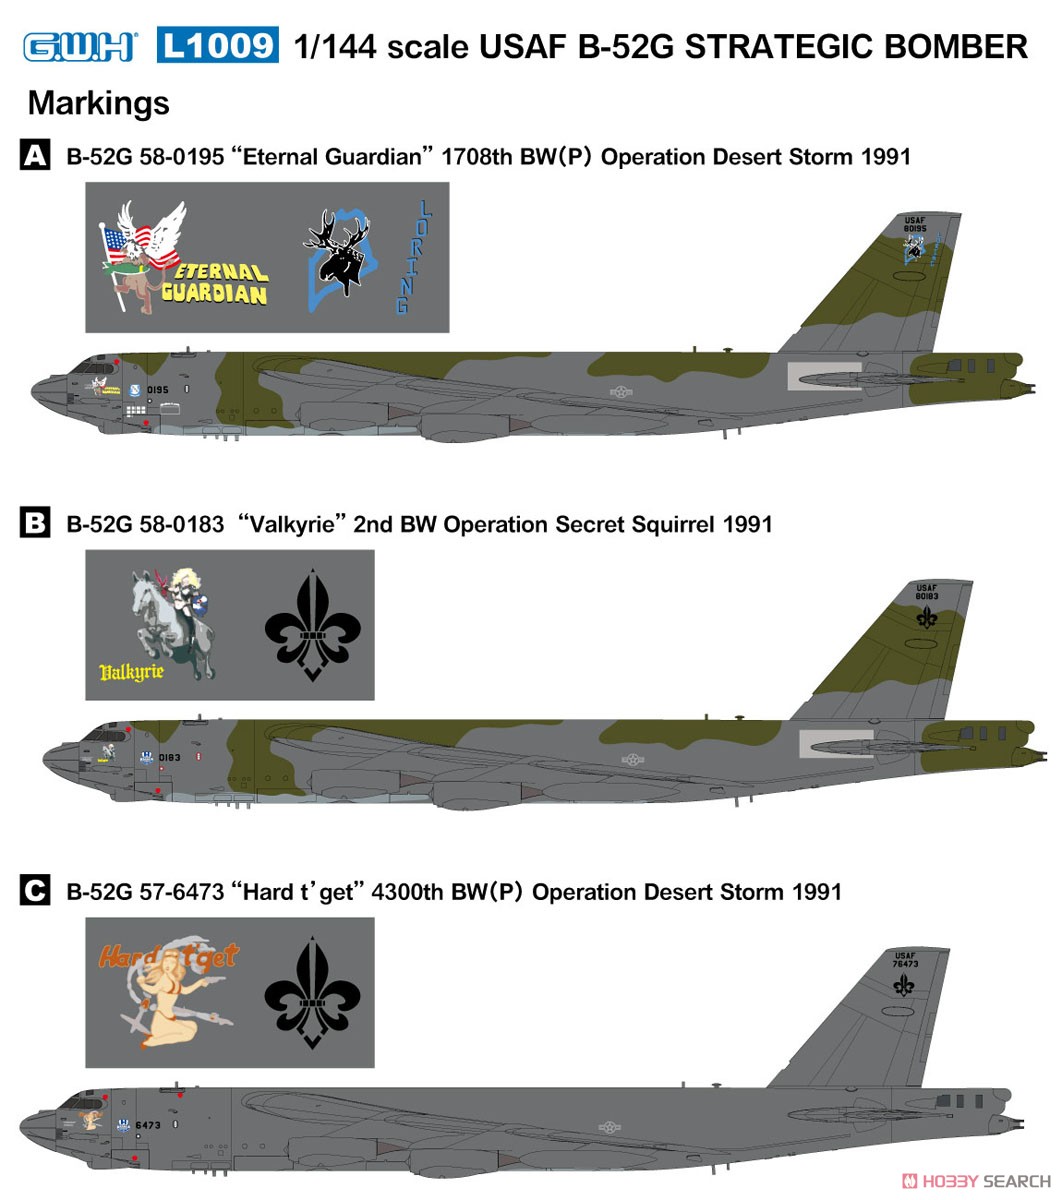 GWH 1/144 B-52G Breaks Cover - Jet Modeling - ARC Discussion Forums